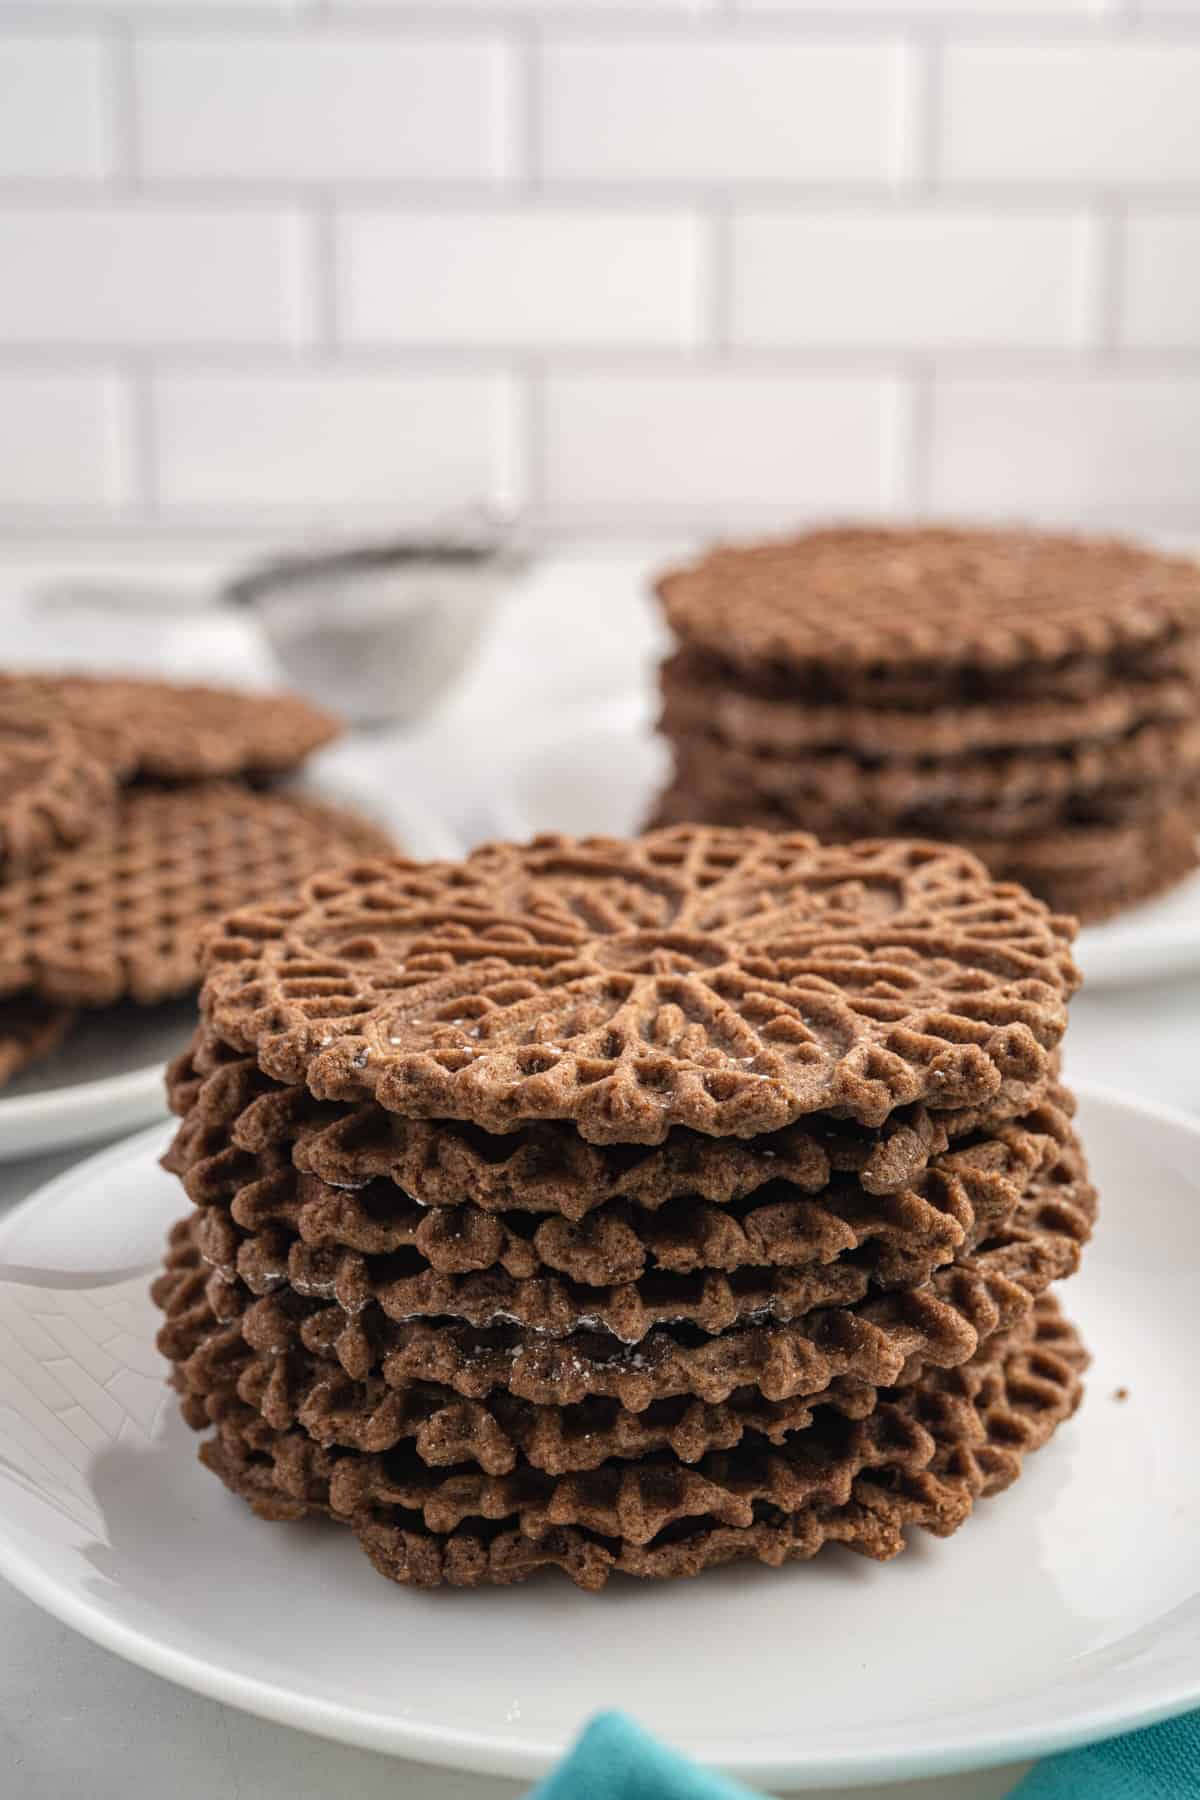 Several stacks of chocolate pizzelles are placed on white plates.